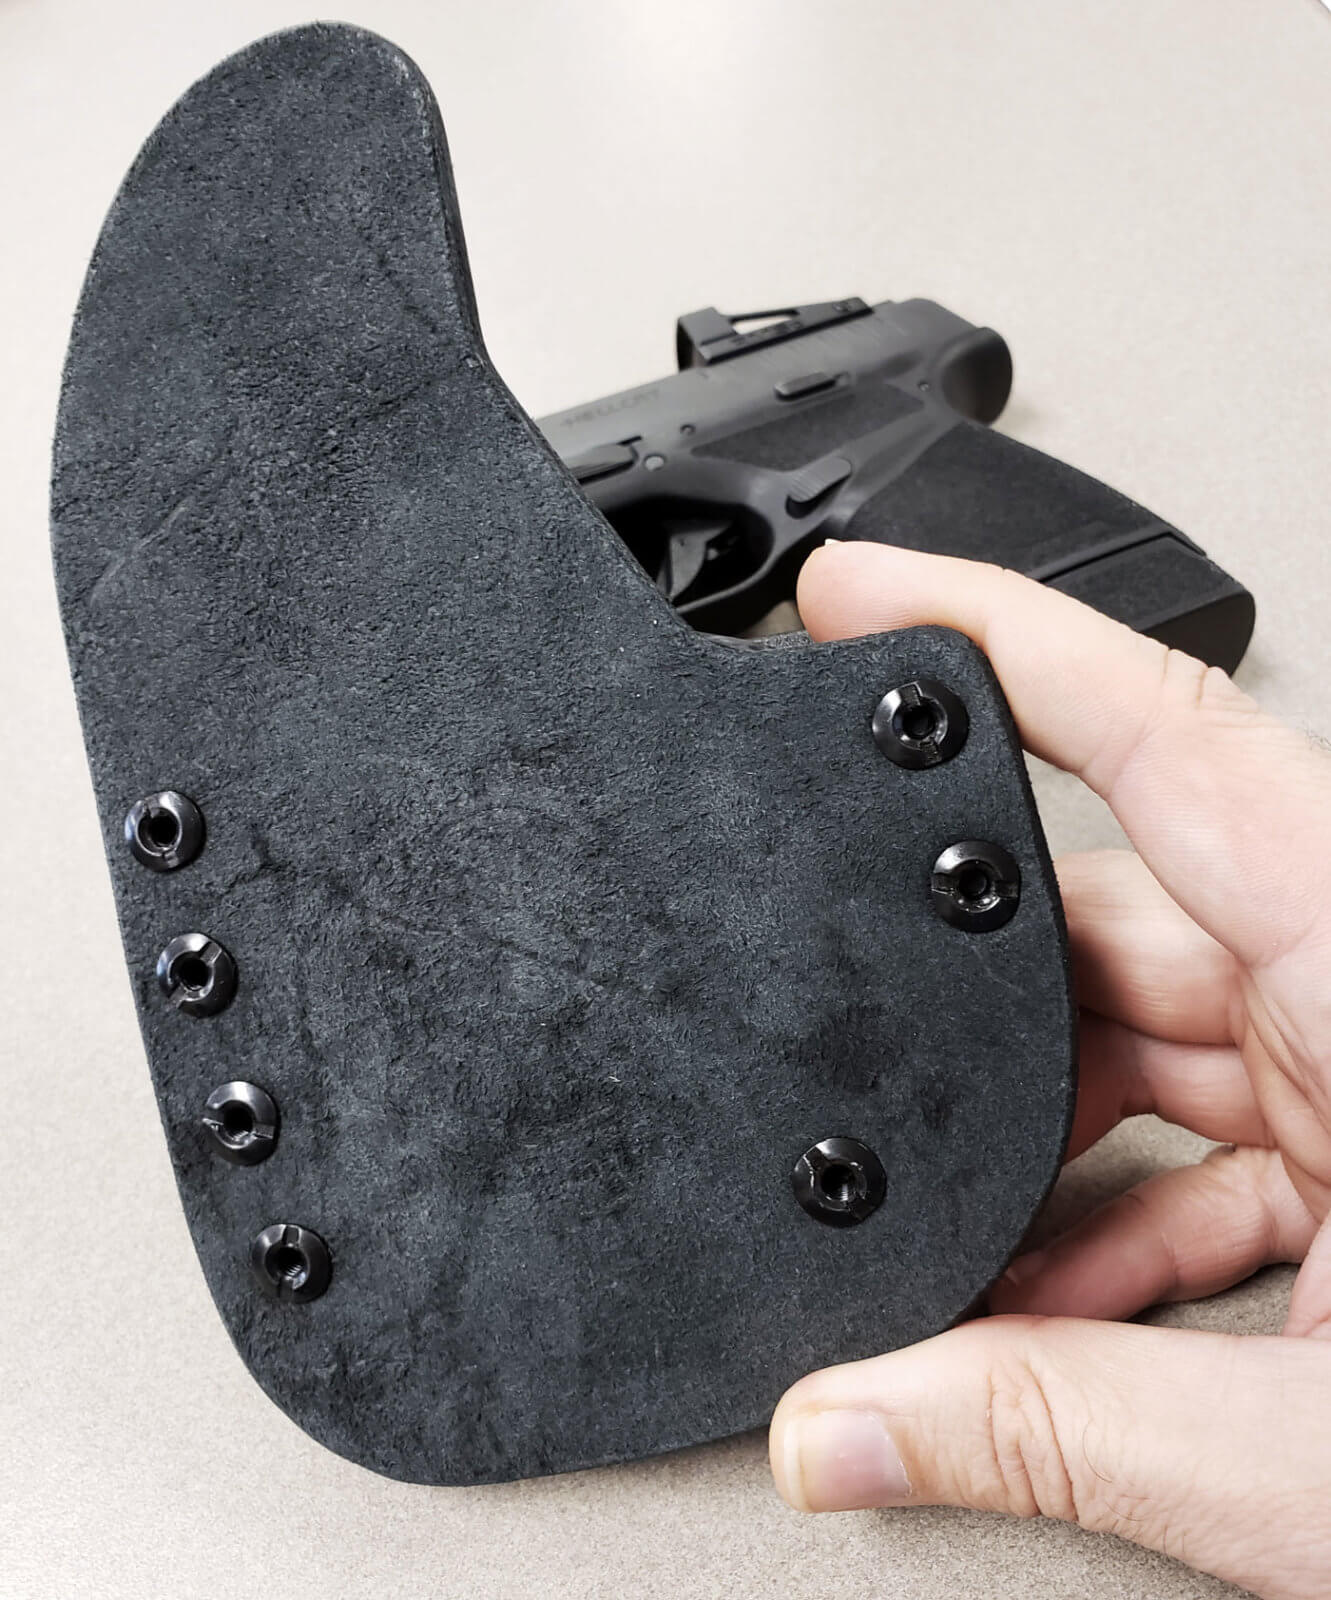 Reckoning holster examination of leather backer